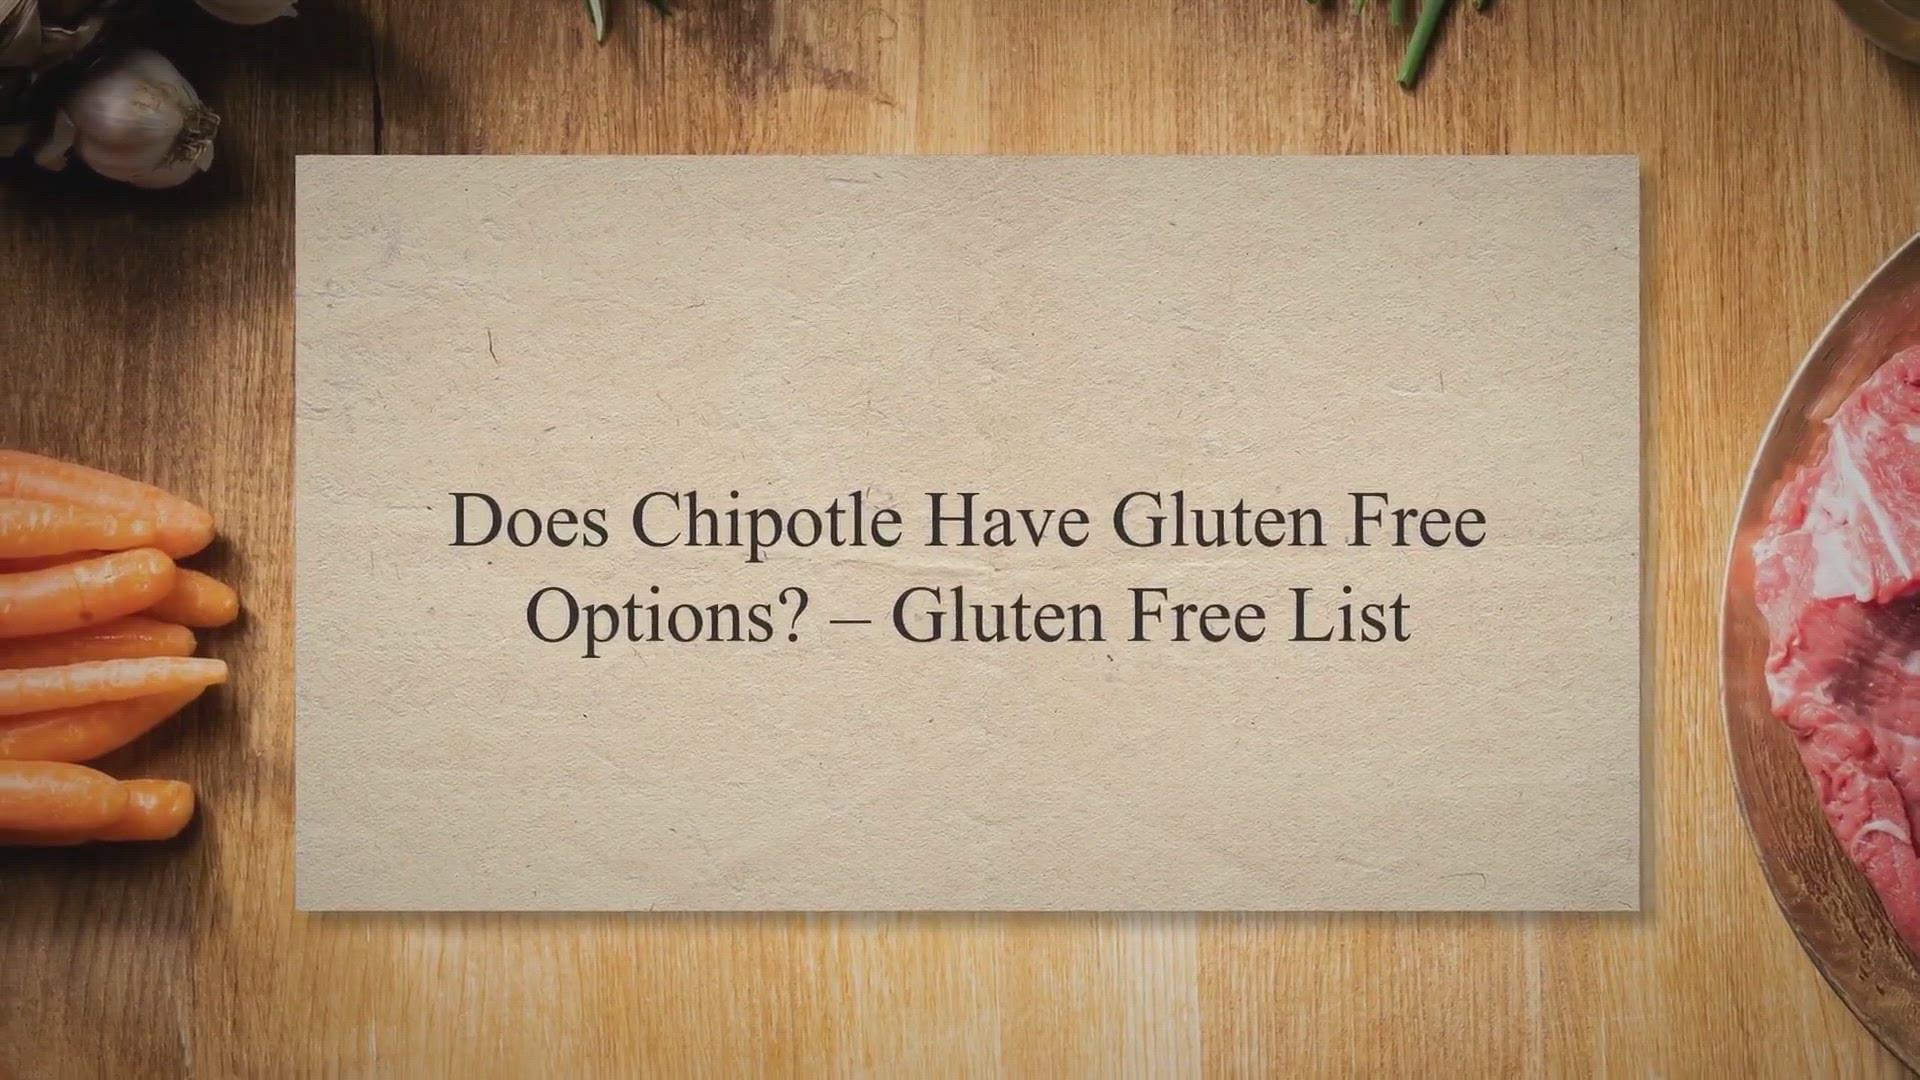 'Video thumbnail for Does Chipotle Have Gluten Free Options? – Gluten Free List'